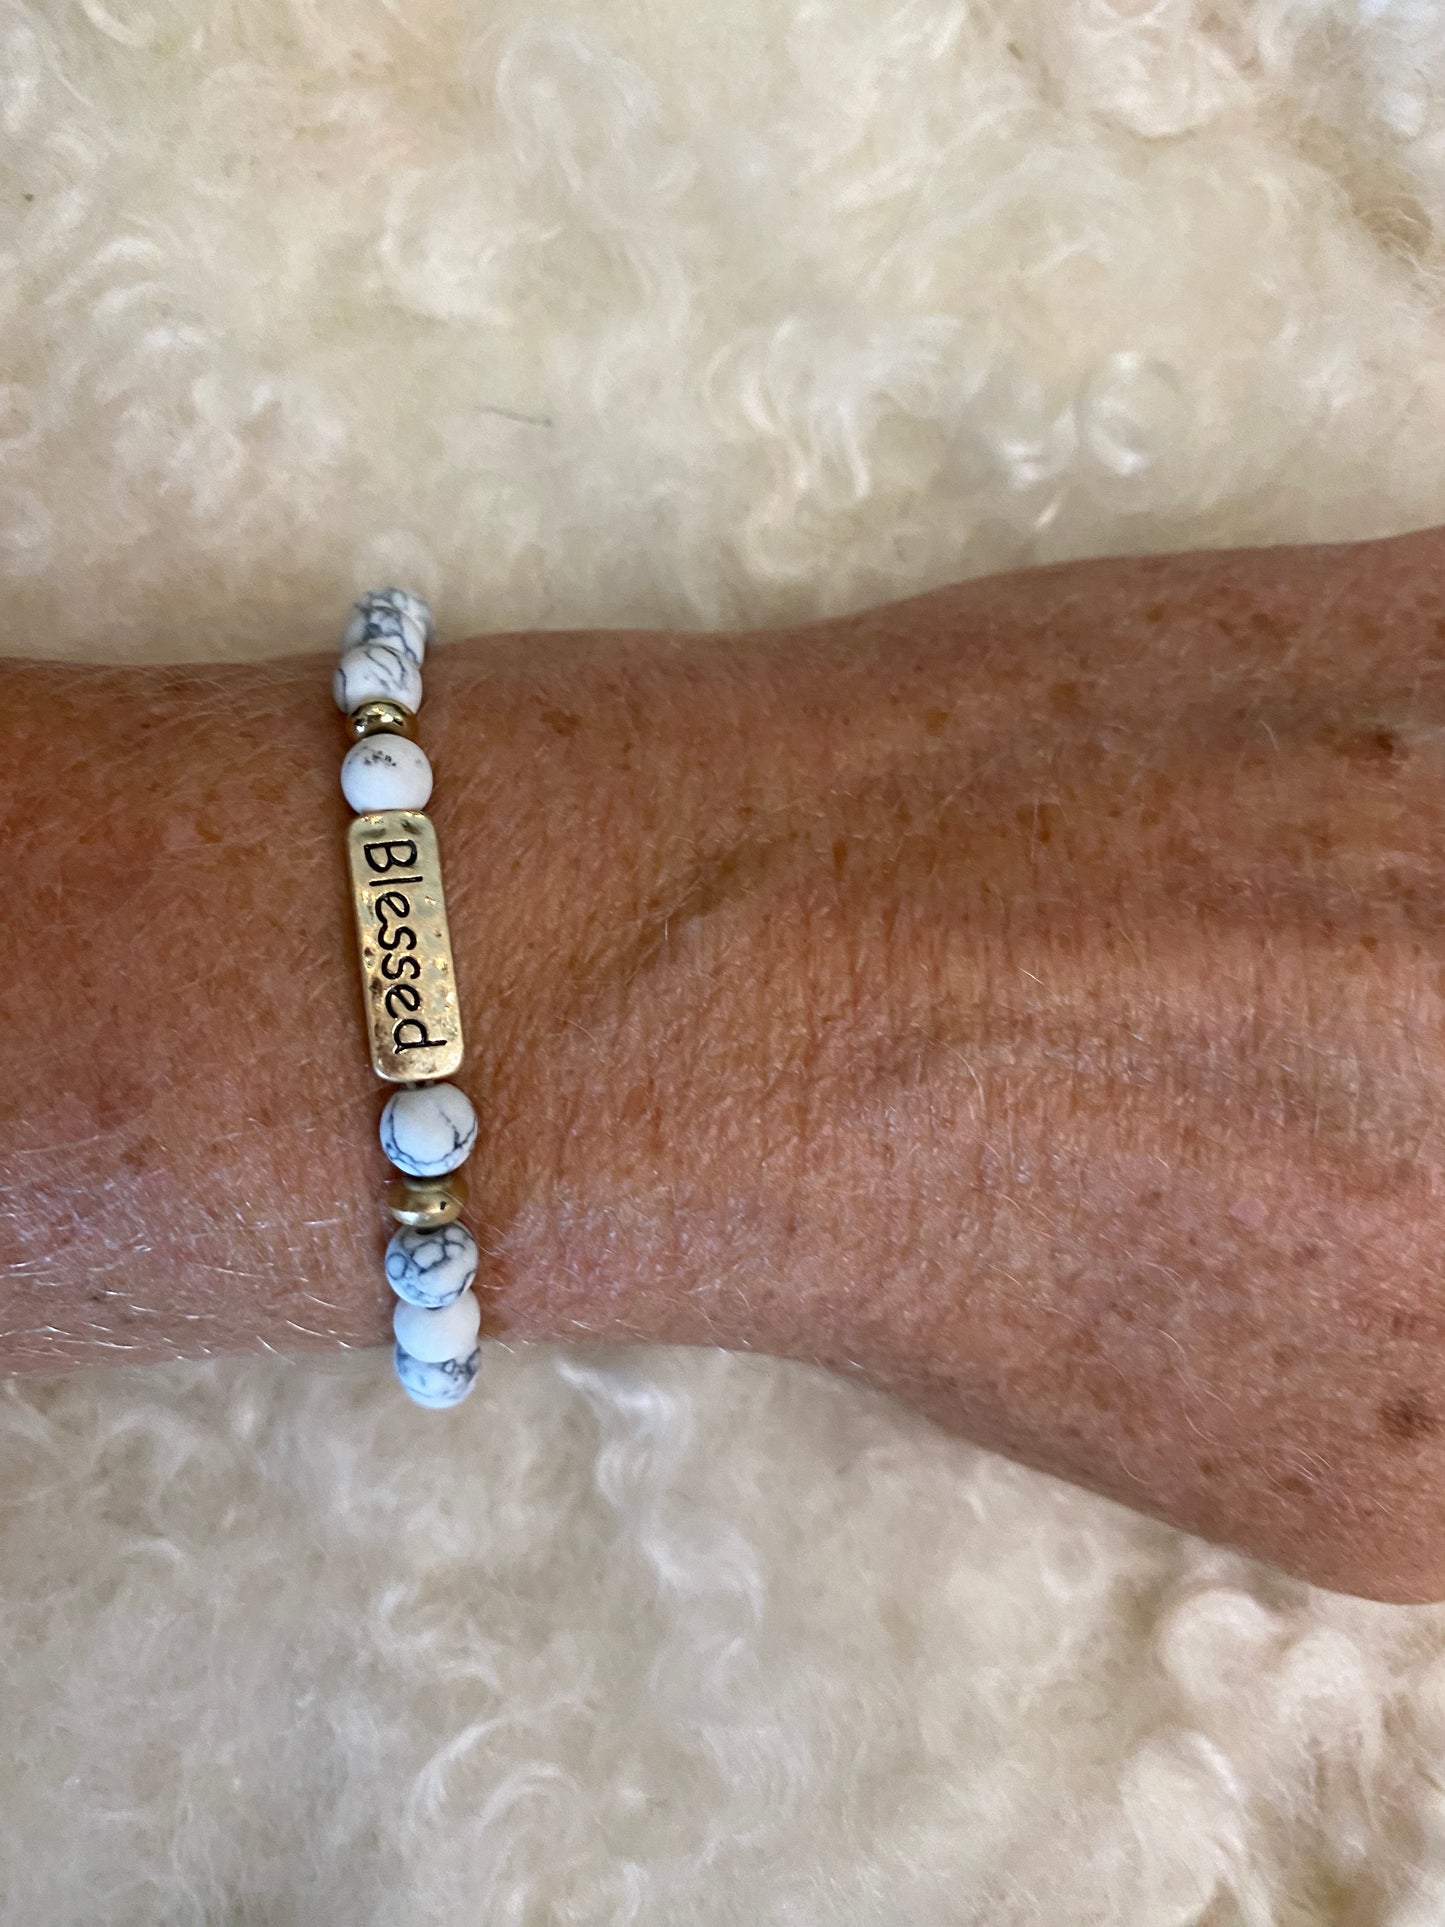 Inspiring Natural Beaded Bracelets- Trust In The Lord & Blessed